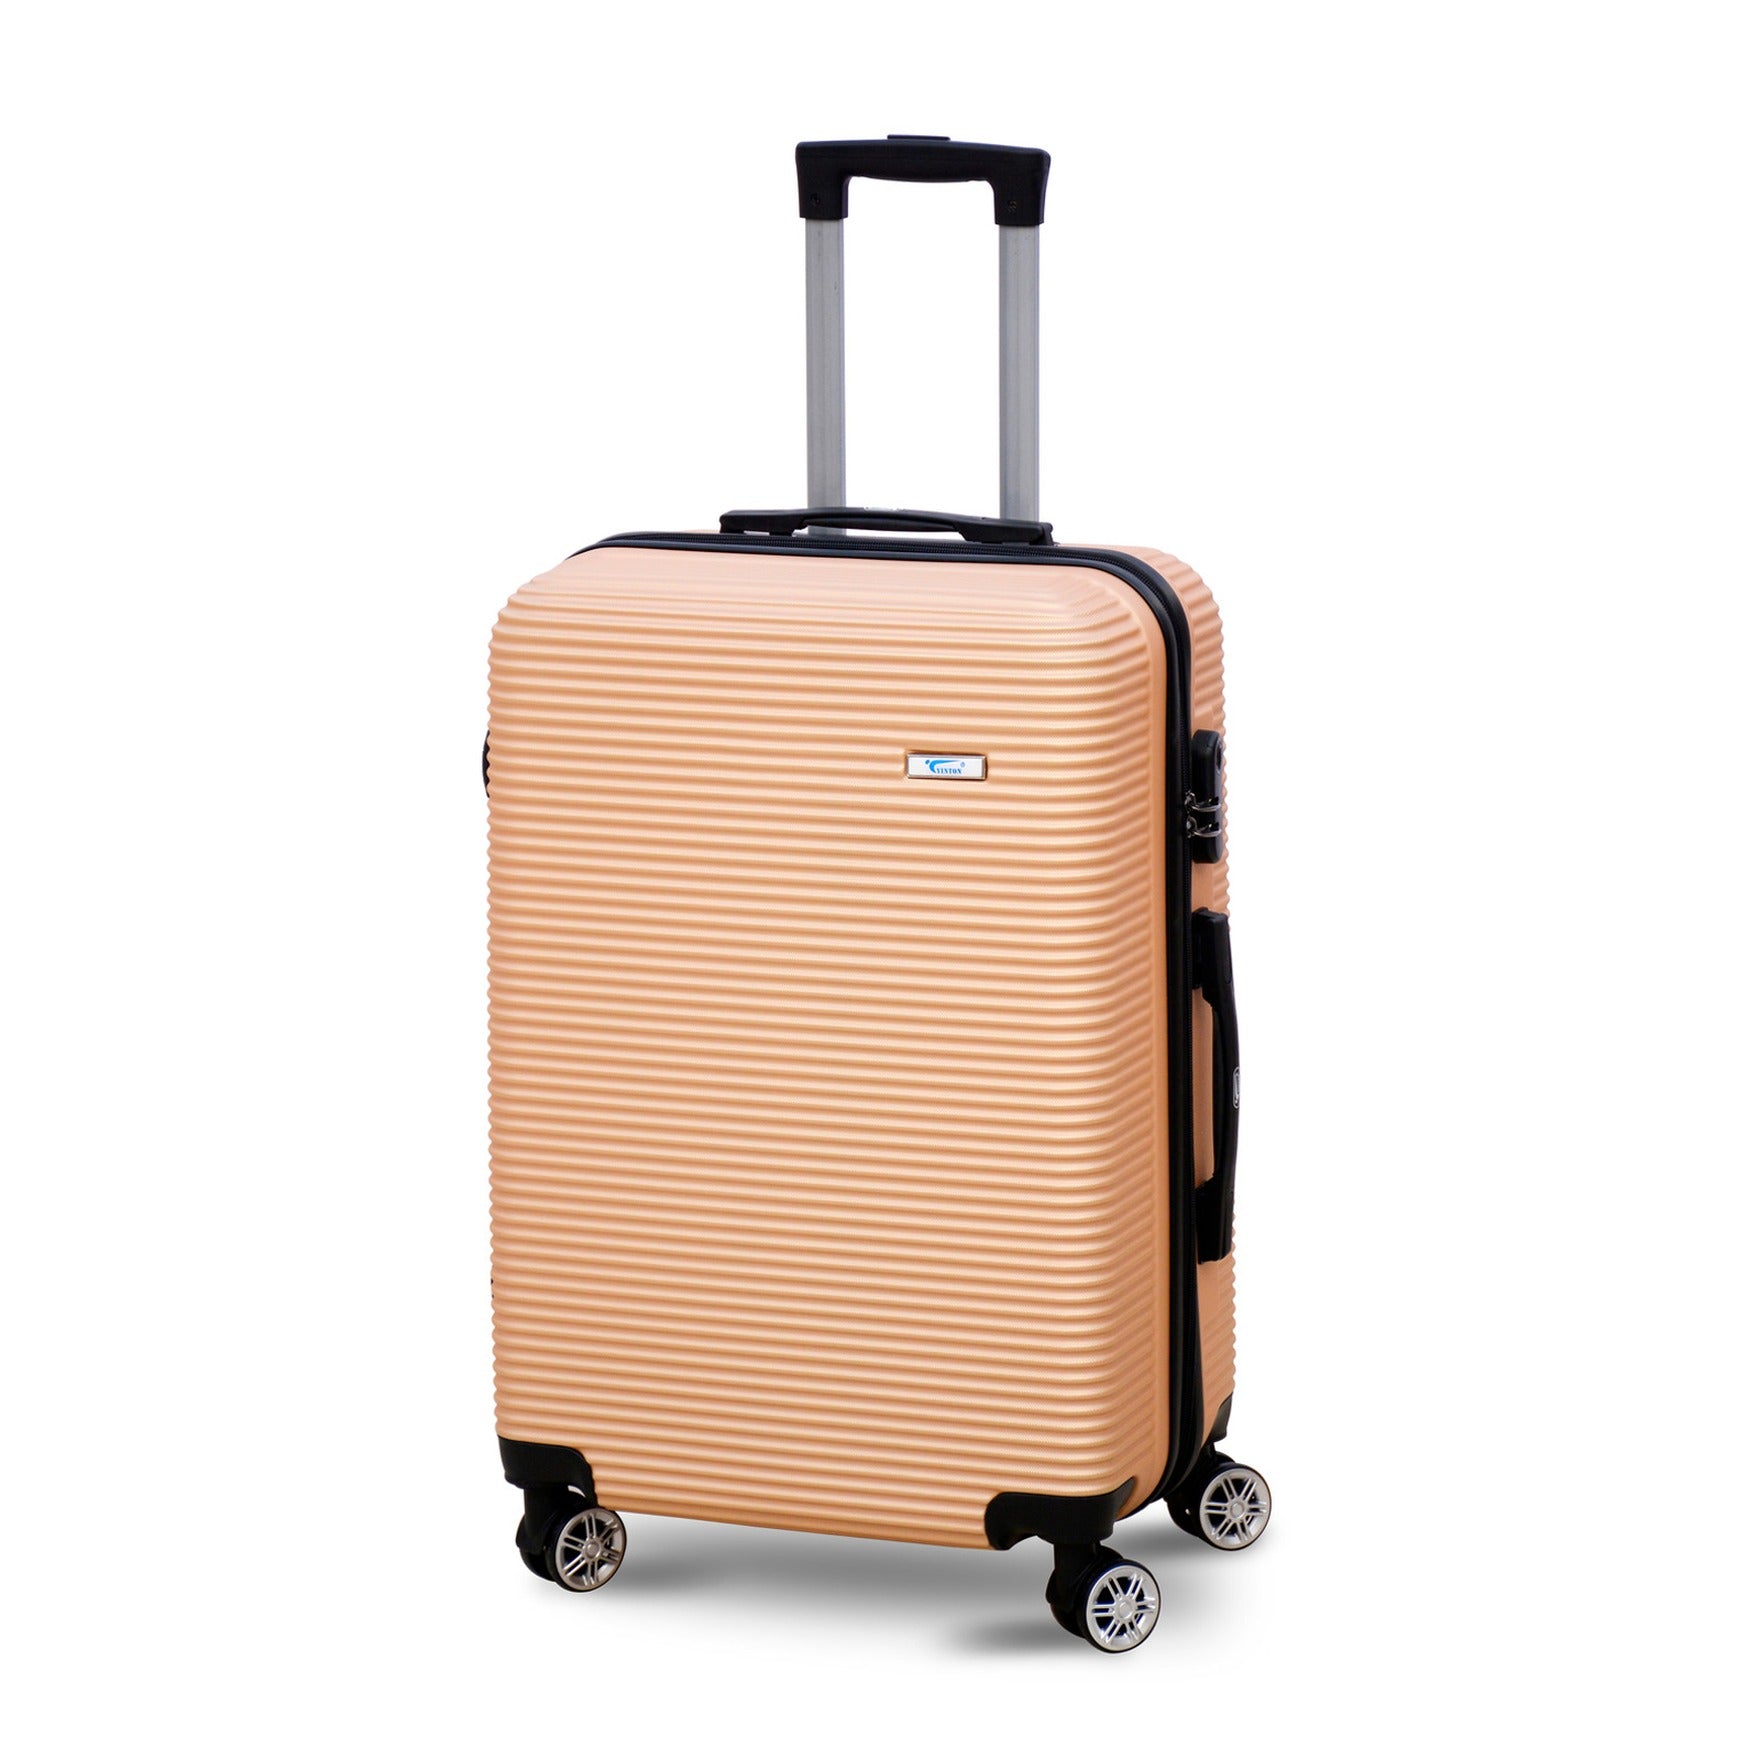  JIAN ABS Line Lightweight Luggage Bag With Double Spinner Wheel Zaappy